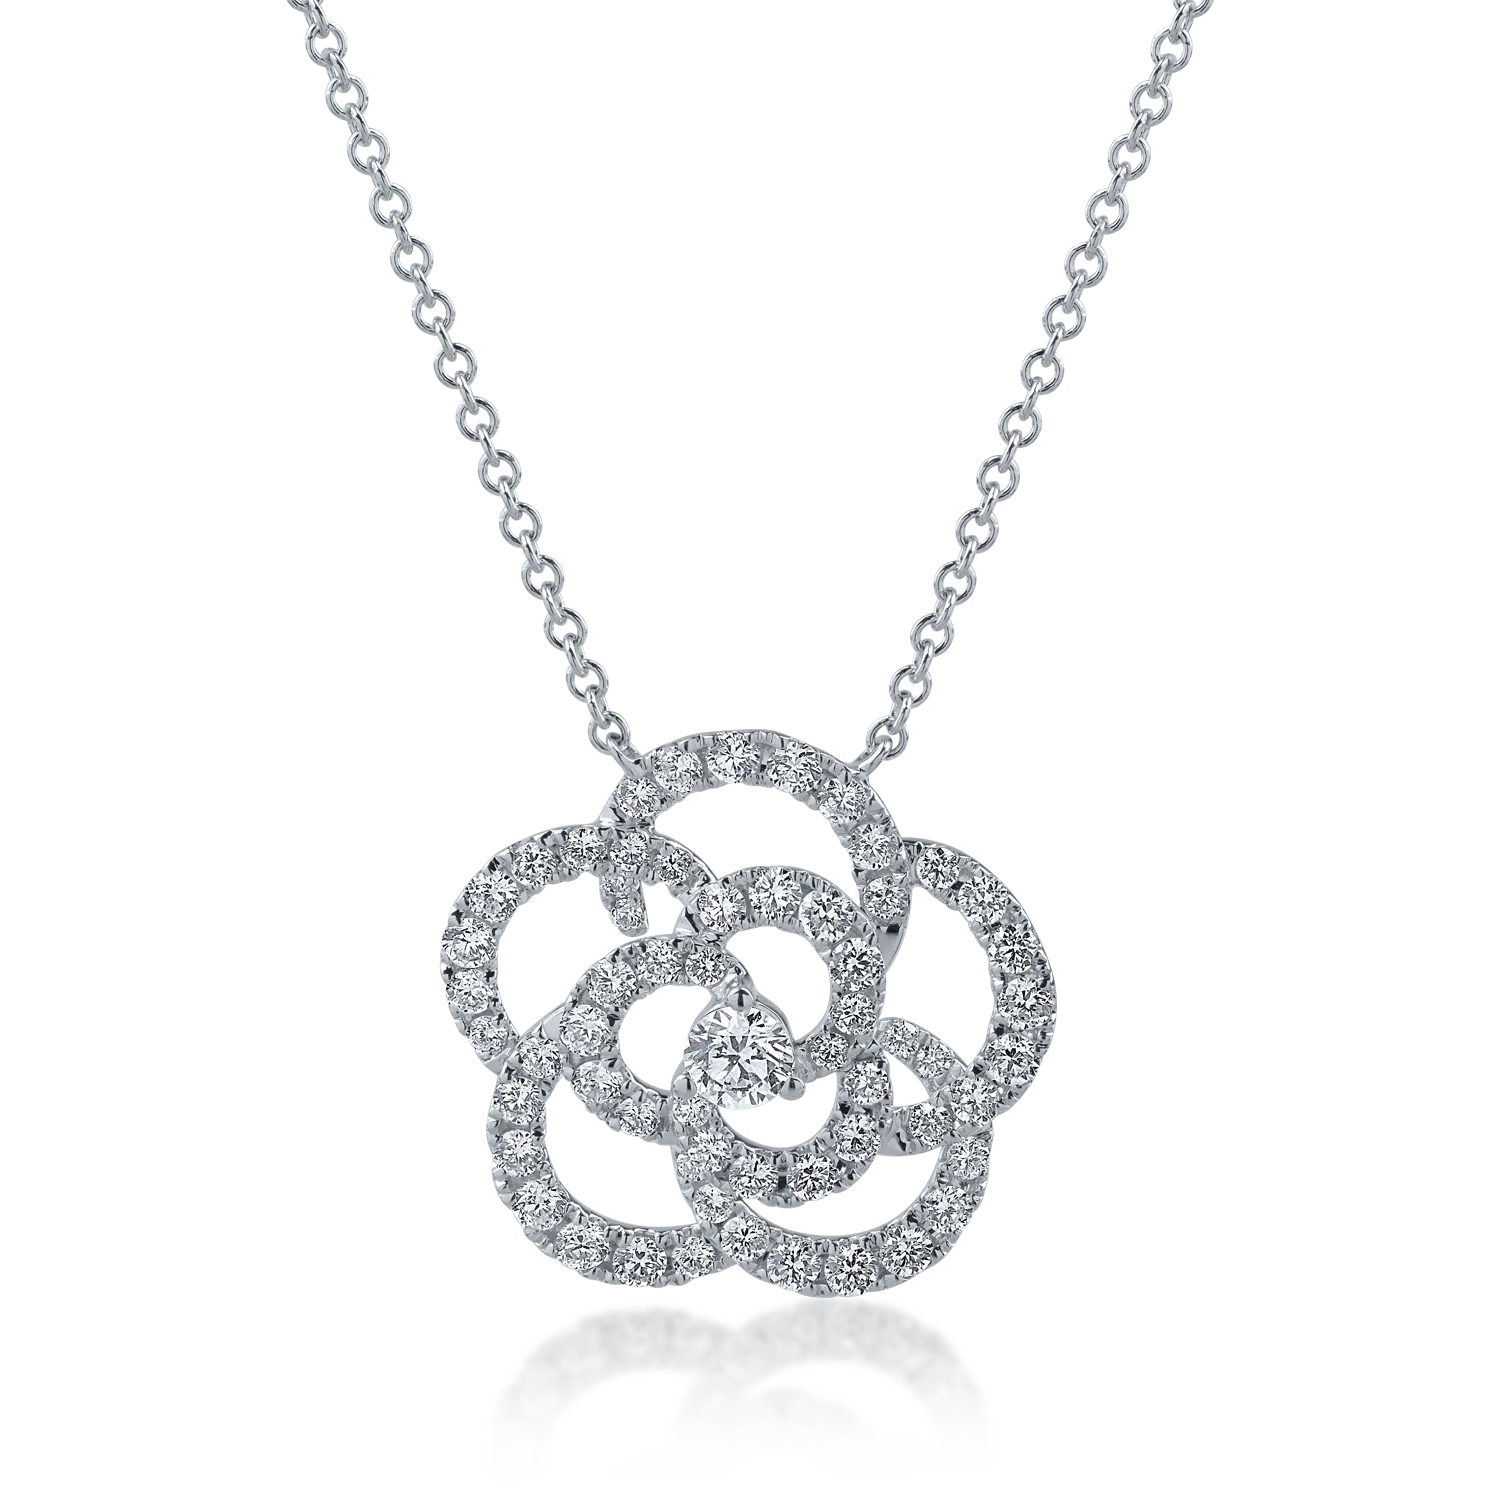 White gold chain with flower pendant with 0.91ct diamonds